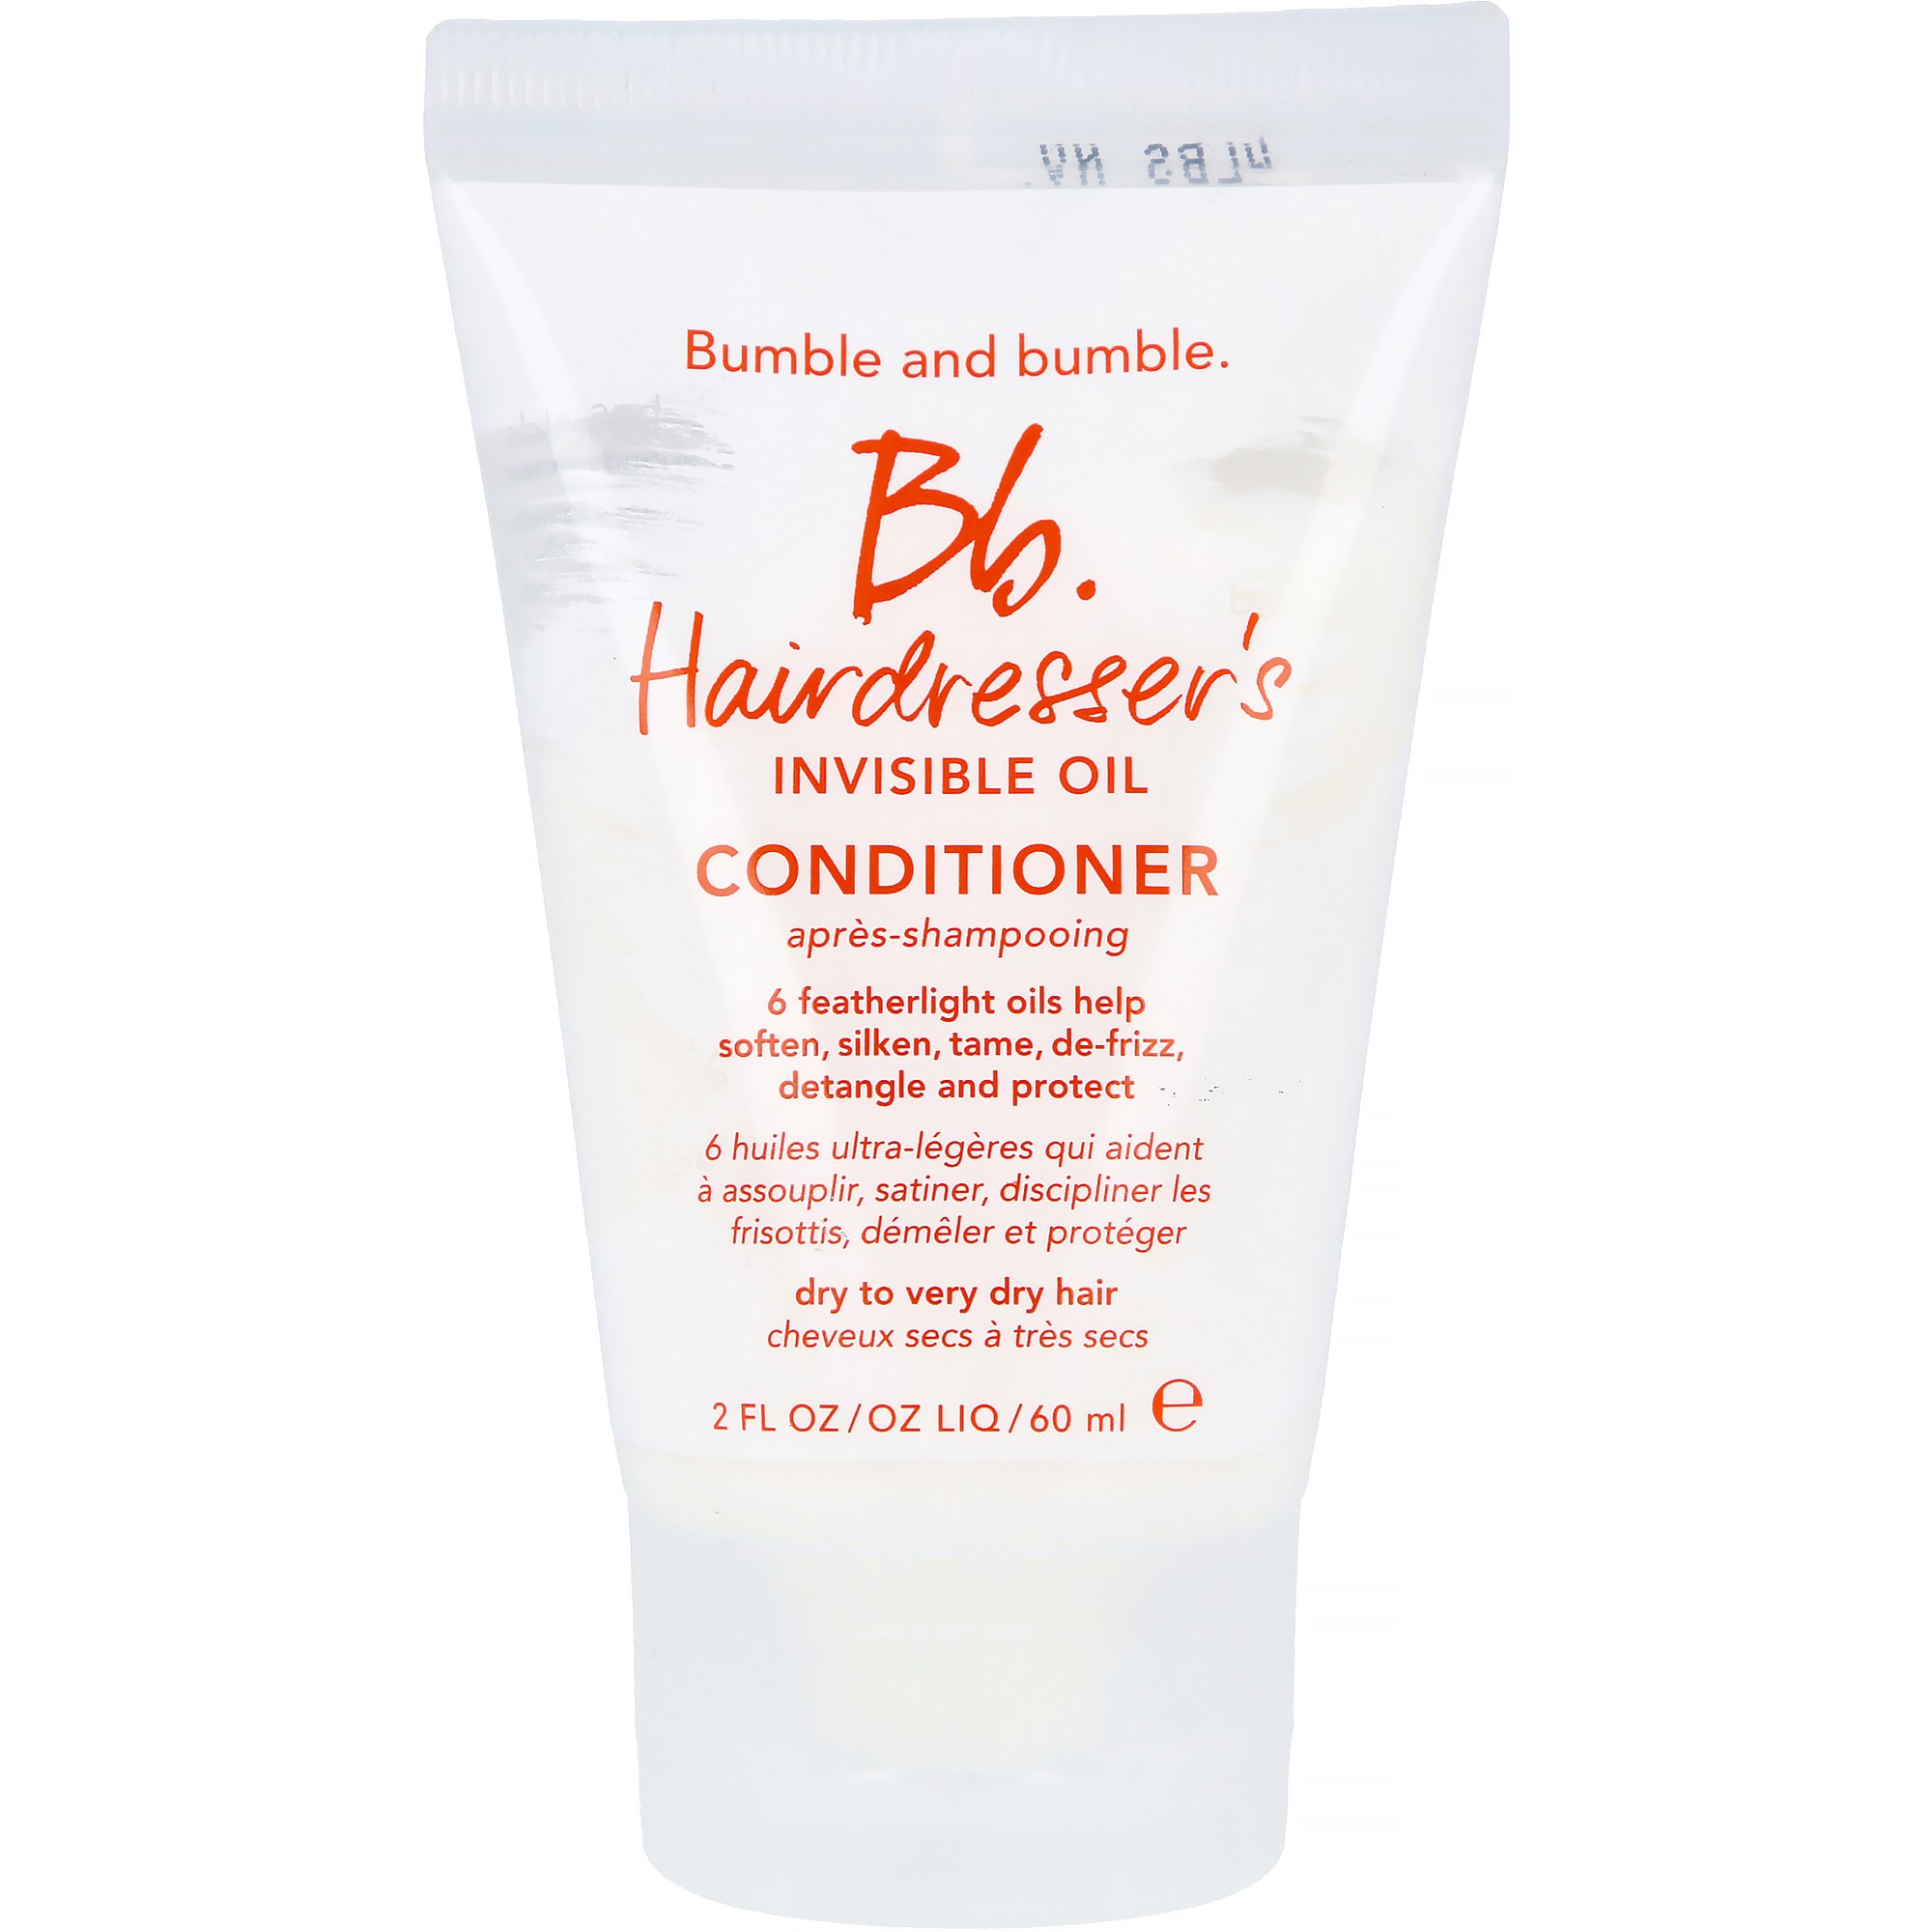 Bumble and bumble Hairdressers Invisible Oil Conditioner 60 ml